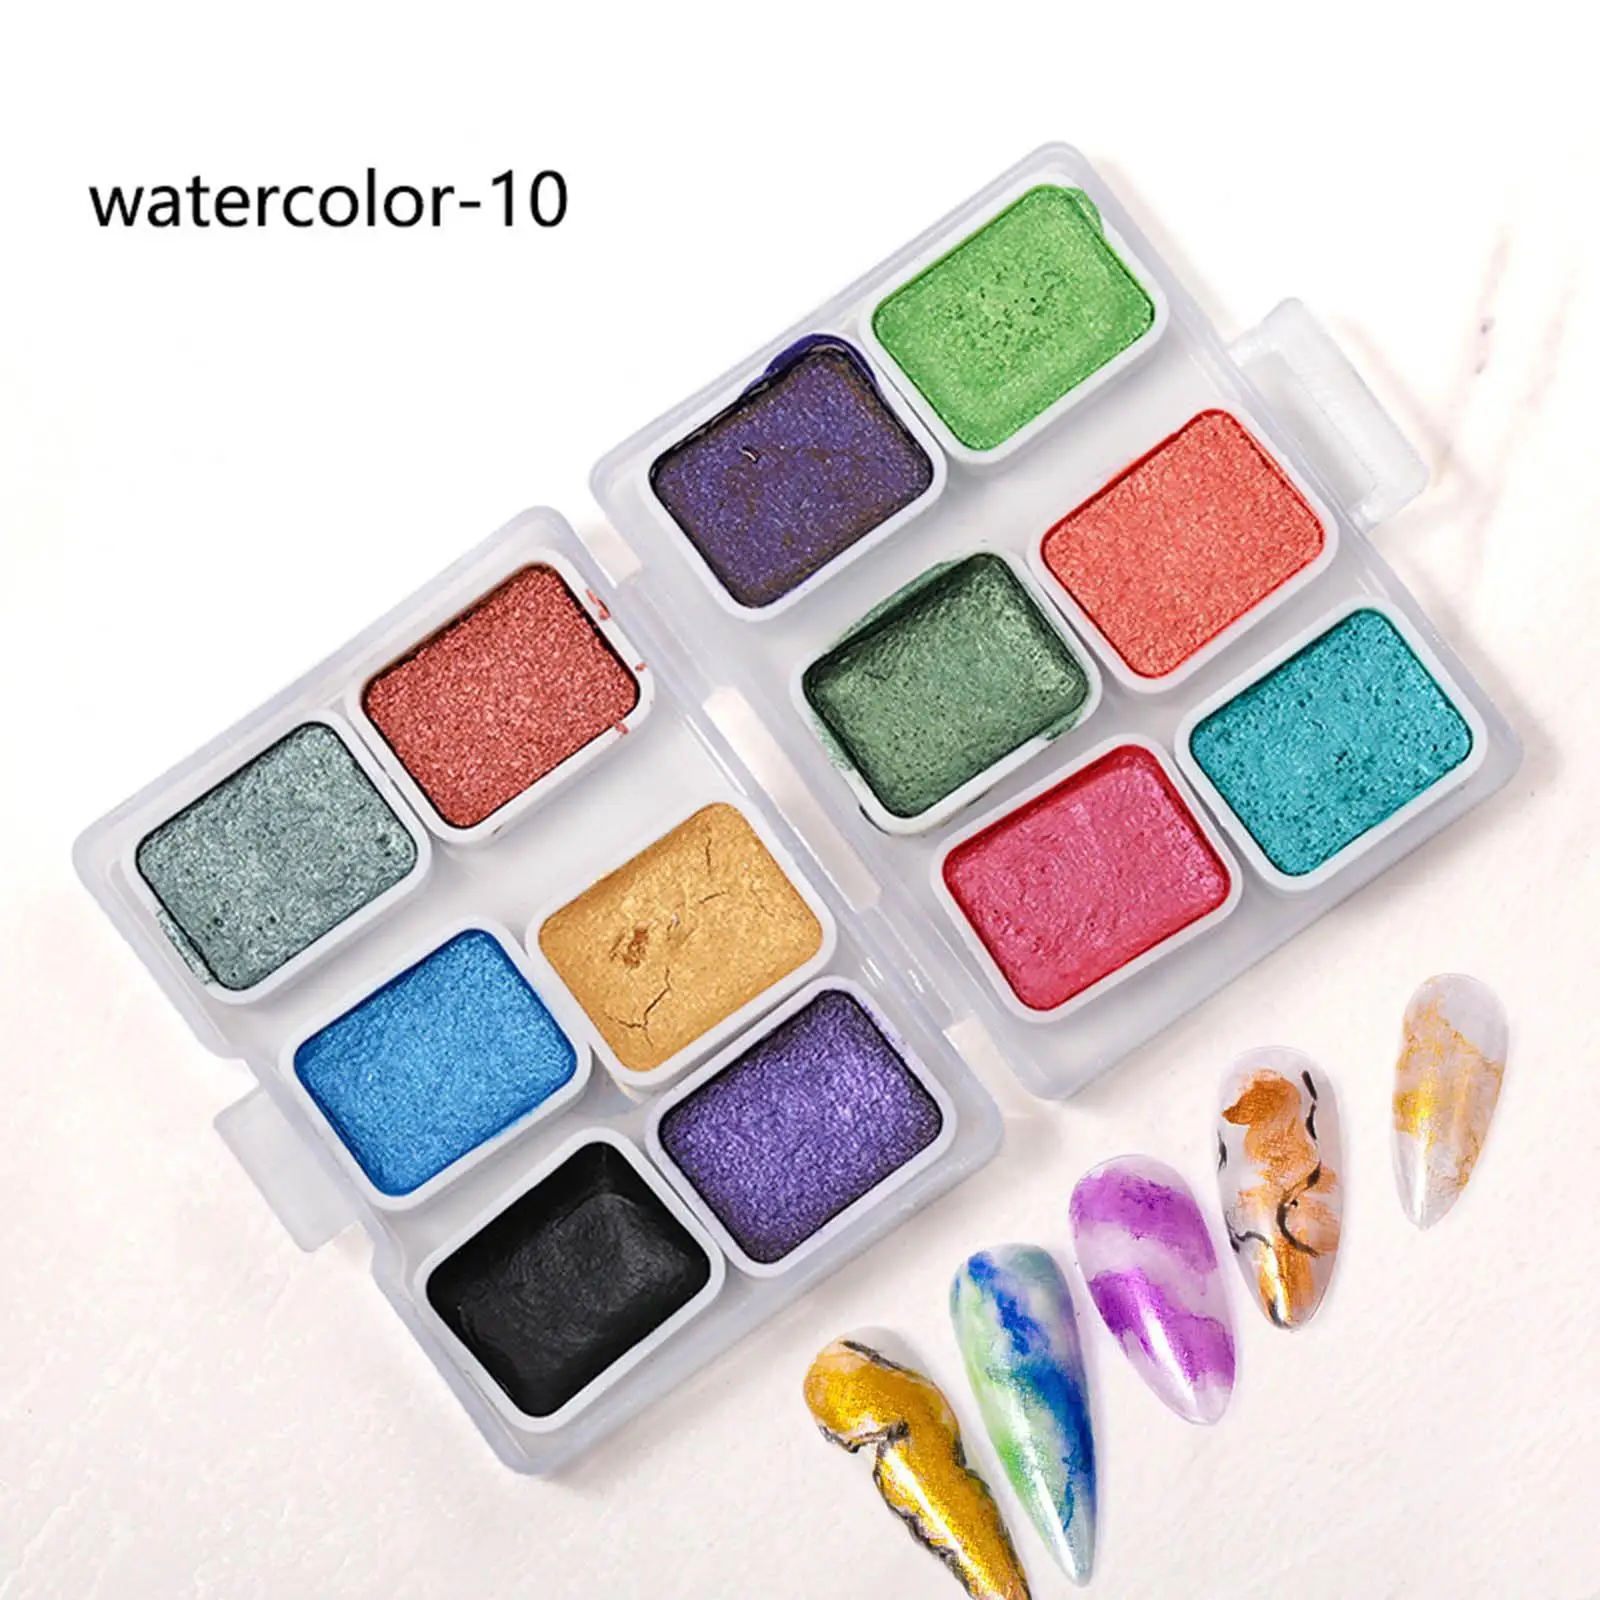 12 Colors Watercolor Paints Set Lightweight Portable Nail Art Pigments for Nail Art Decoration DIY Home School Painting Lovers